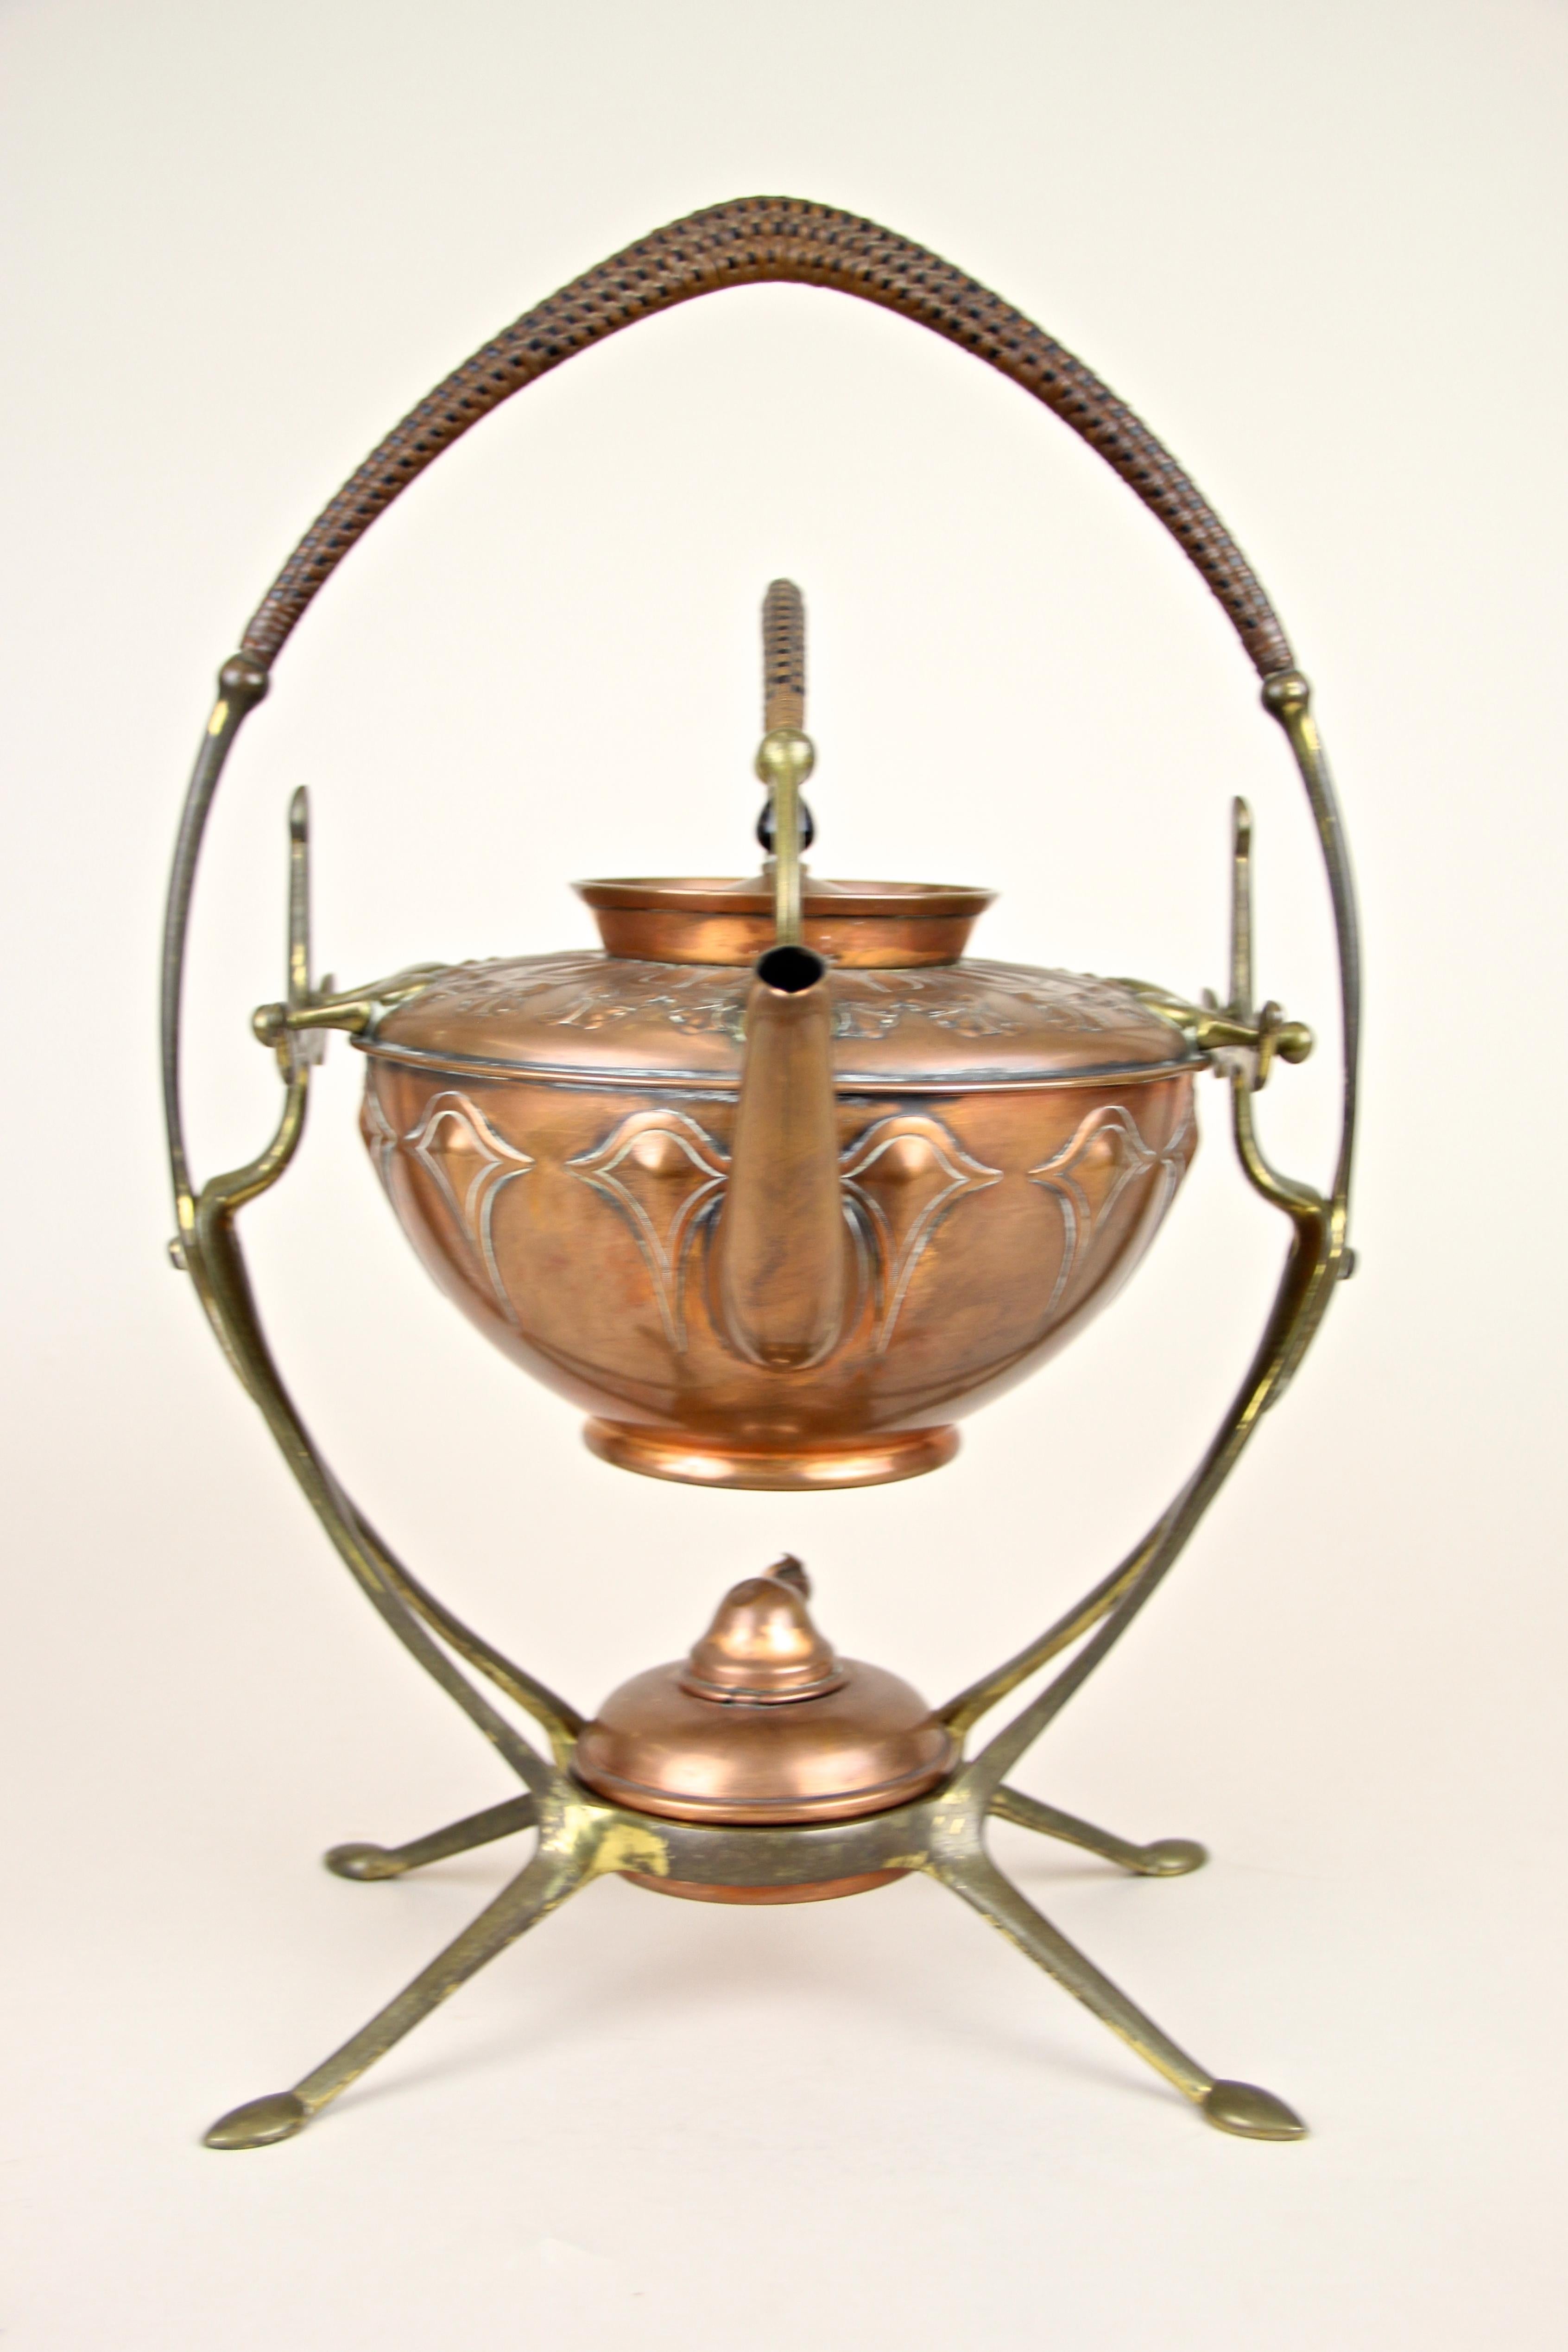 20th Century Art Deco Tea Set by WMF, Copper-Plated, Germany, circa 1920 5